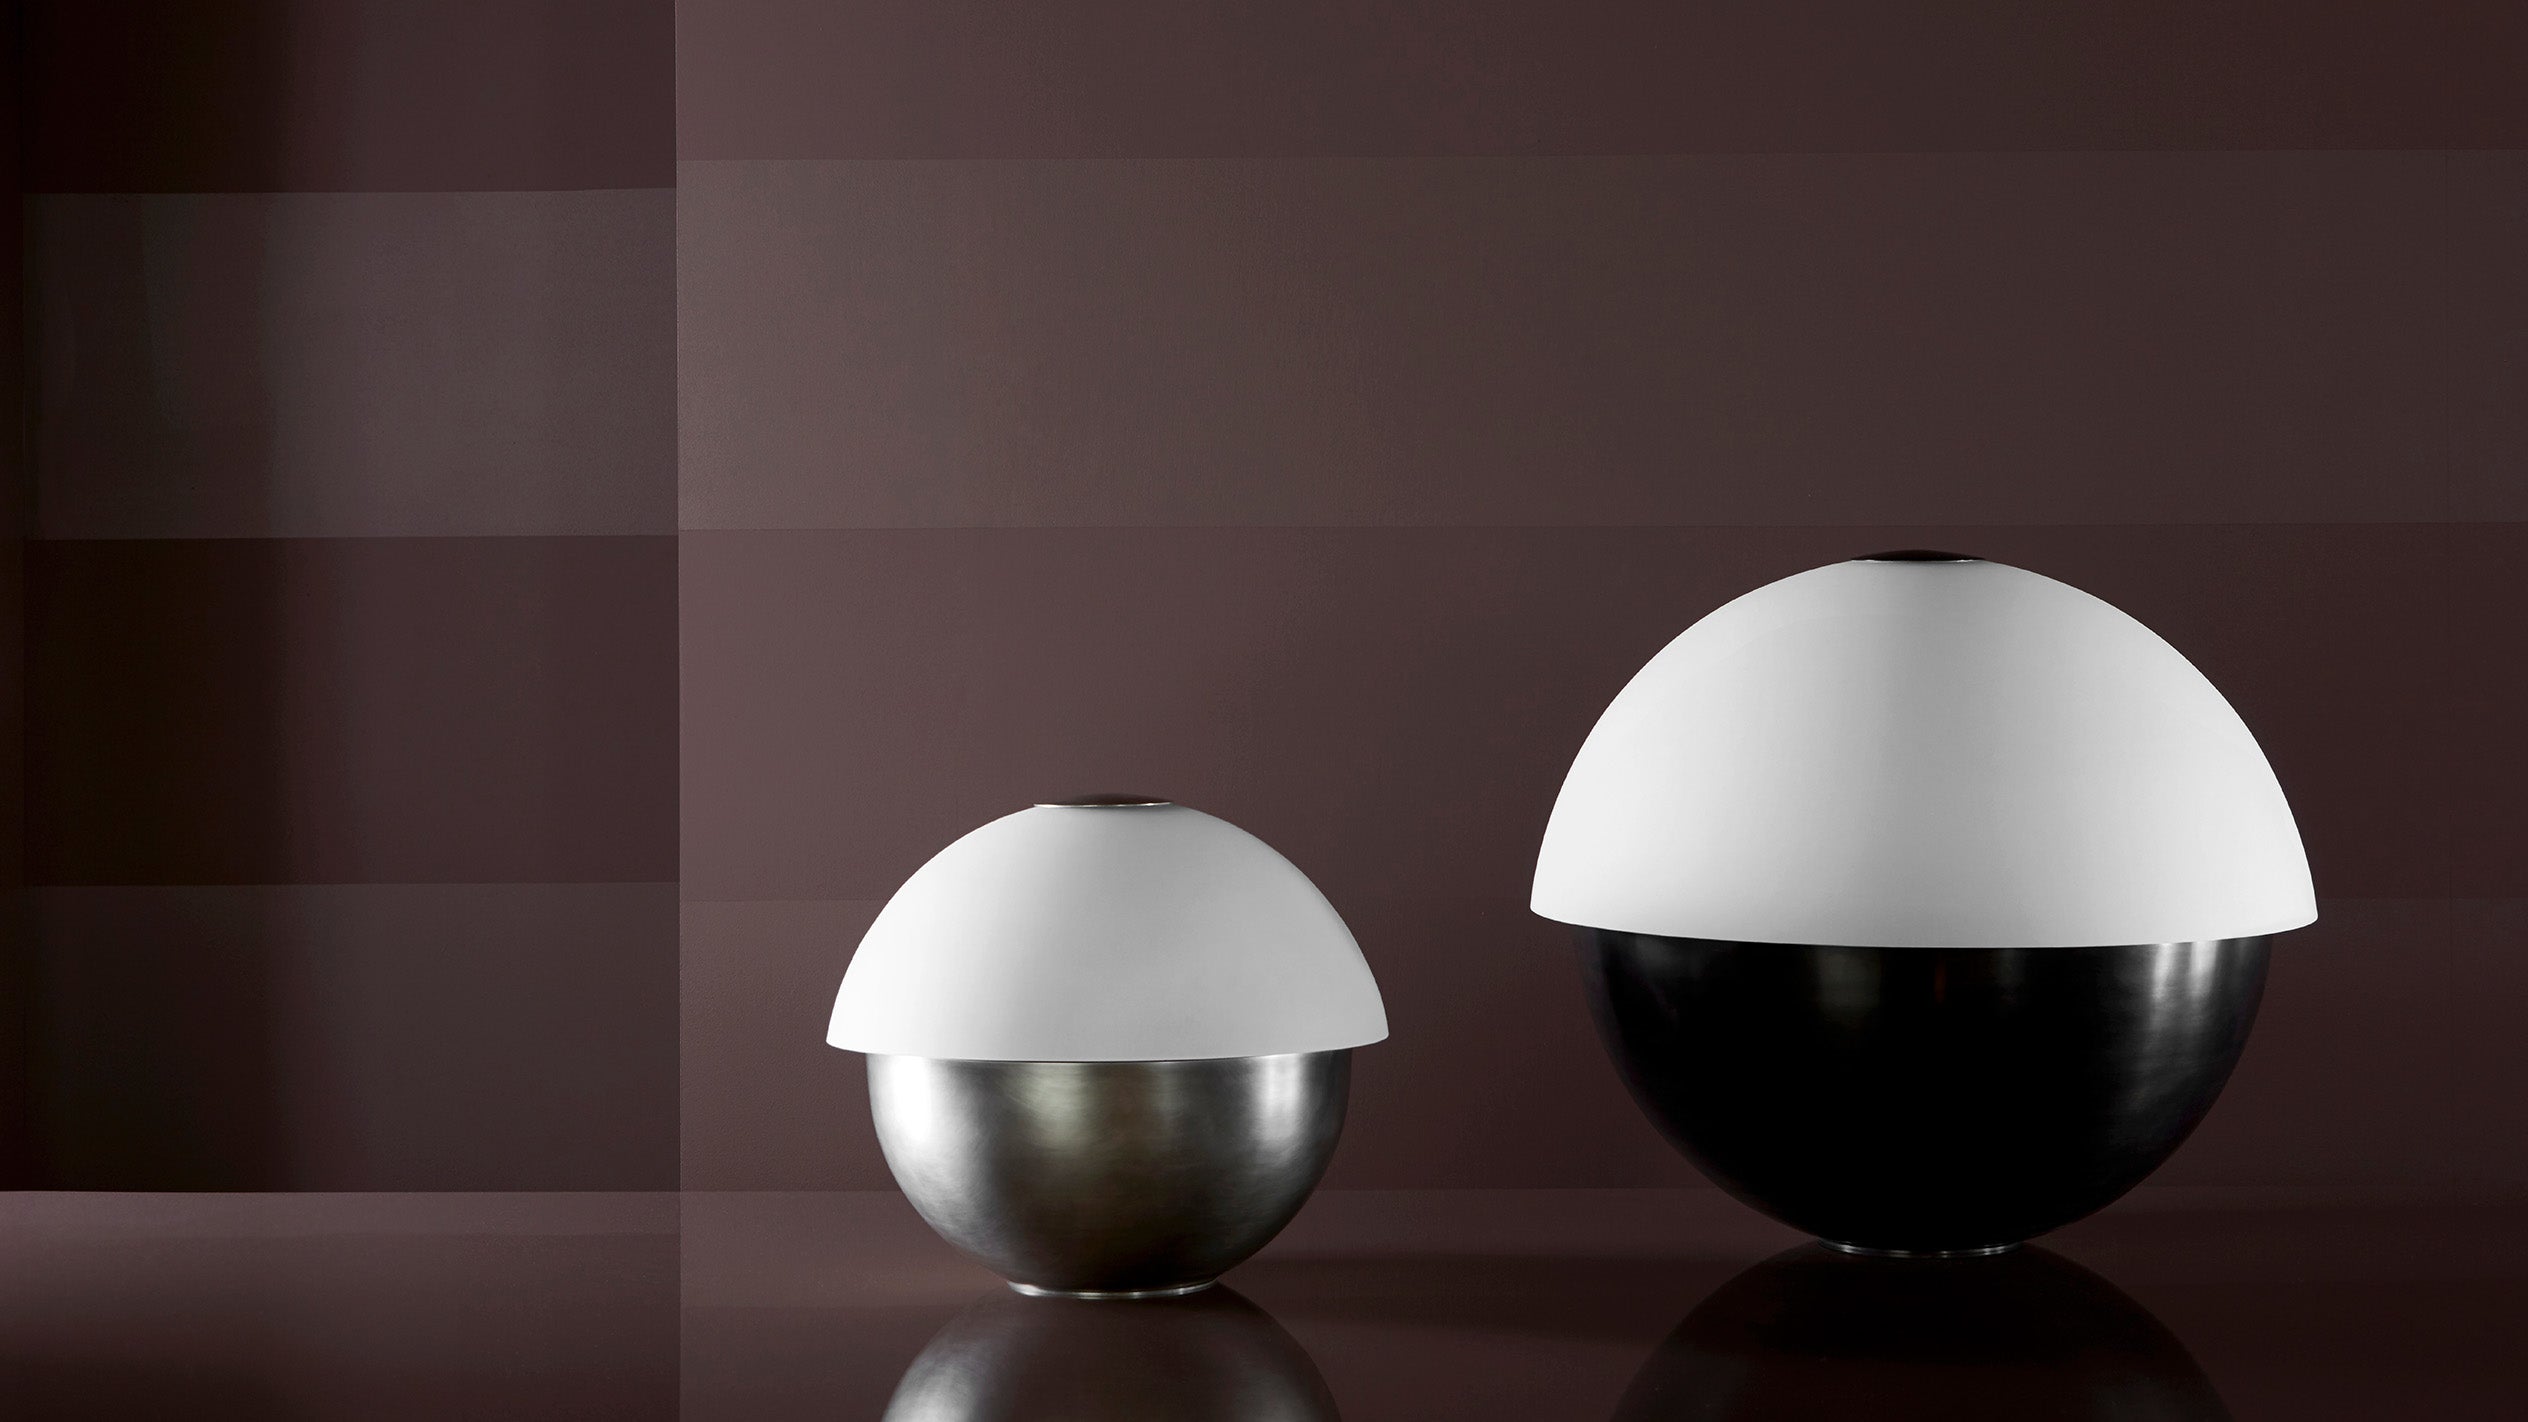 AXON : SMALL table lamp in Tarnished Silver and AXON : LARGE table lamp in Blackened Brass on a surface.